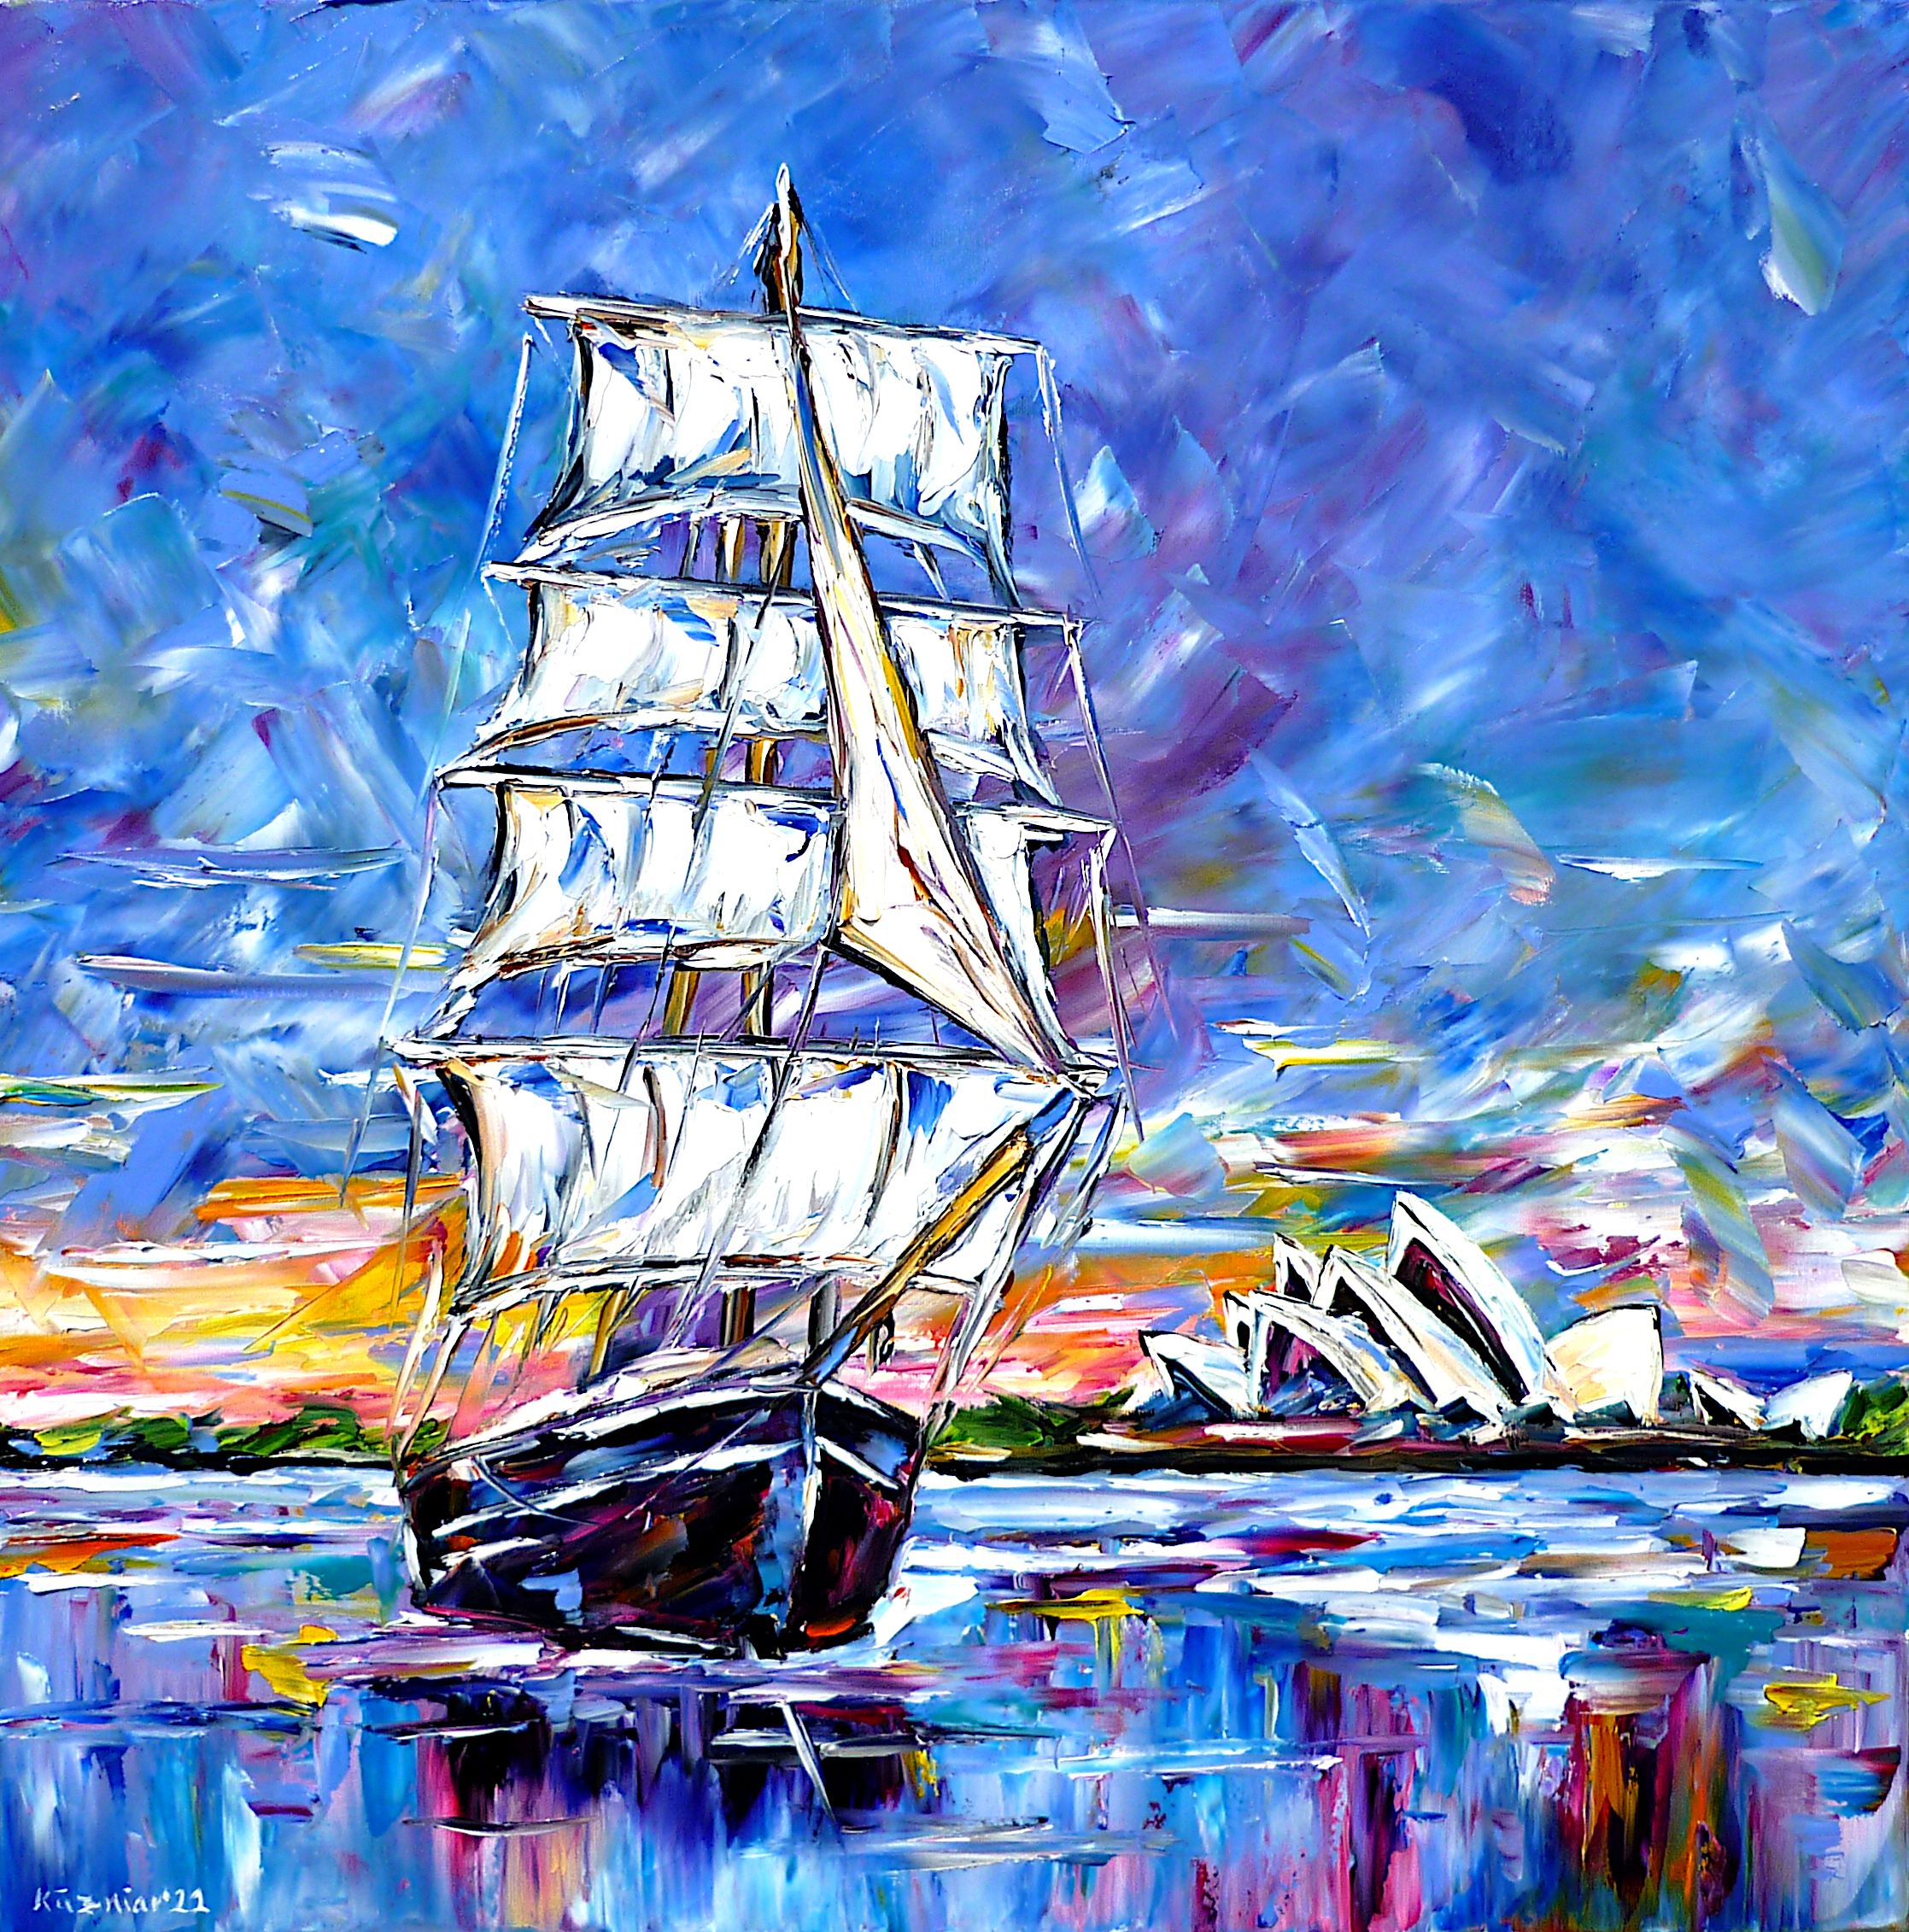 sydney opera house,sailing ship,sydney painting,sailing,old ship,sky over sydney,seascape,sydney abstract,sunset at sea,sydney sunset,abstract sky,sydney in the evening,evening light,evening sun,sydney skyline,sydney beauty,sydney love,sydney lover,i love sydney,sailing ship cruise,tall ship,historic sailing ship,blue colors,blue painting,blue tones,square format,square picture,square painting,palette knife oil painting,modern art,impressionism,expressionism,abstract painting,lively colors,colorful painting,bright colors,light reflections,impasto painting,figurative